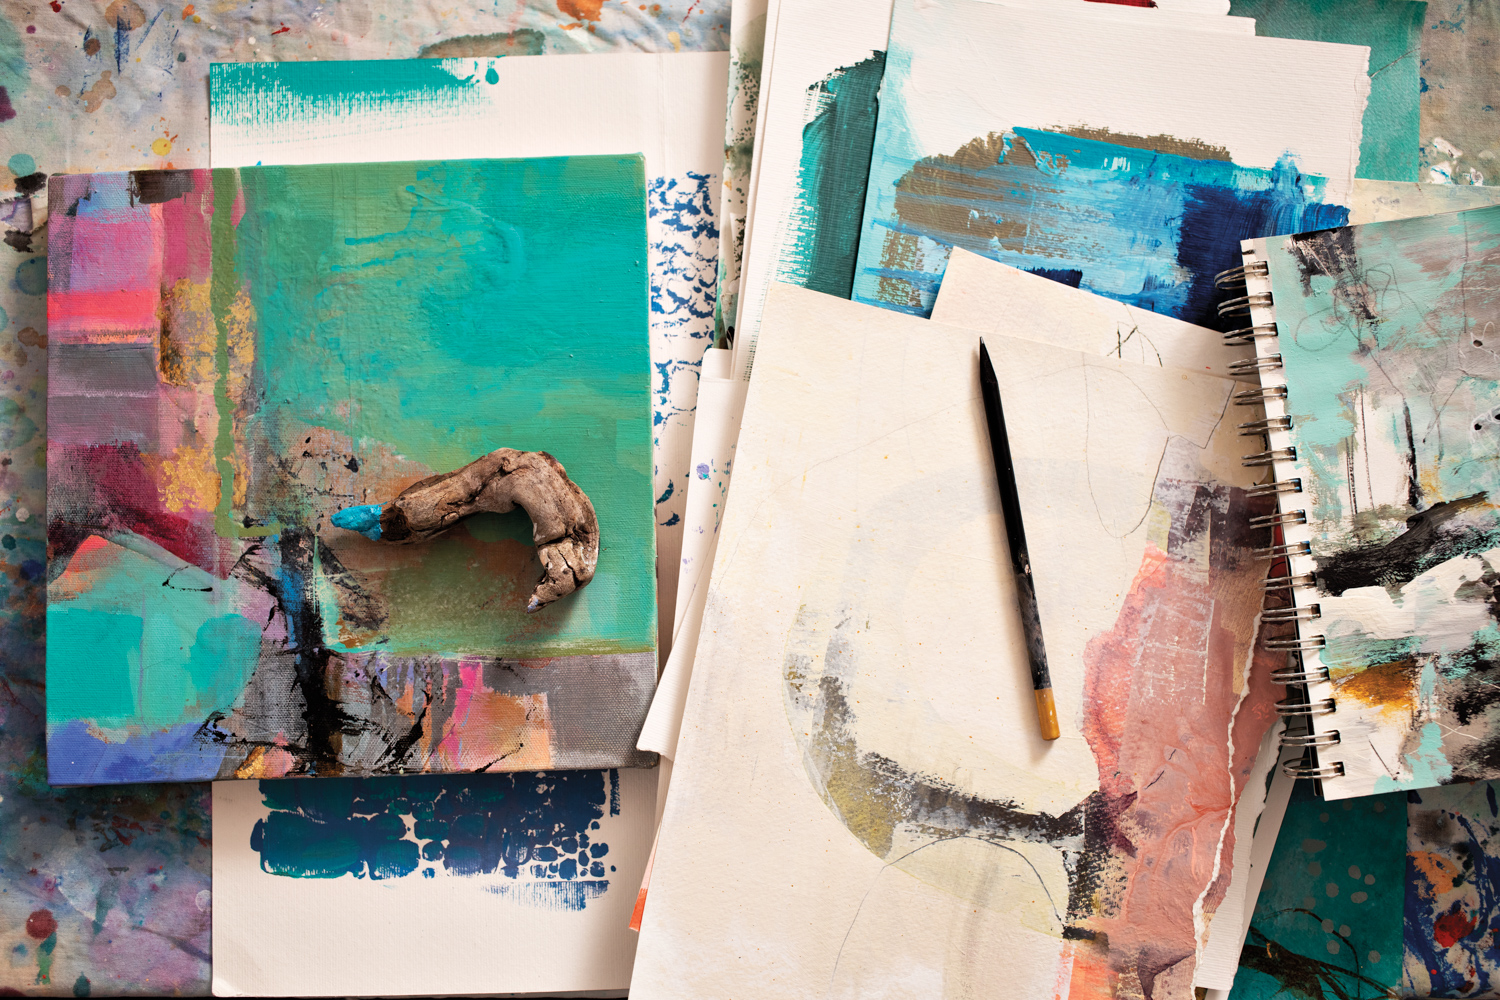 A collection of sketchbooks covered in abstract paintings.